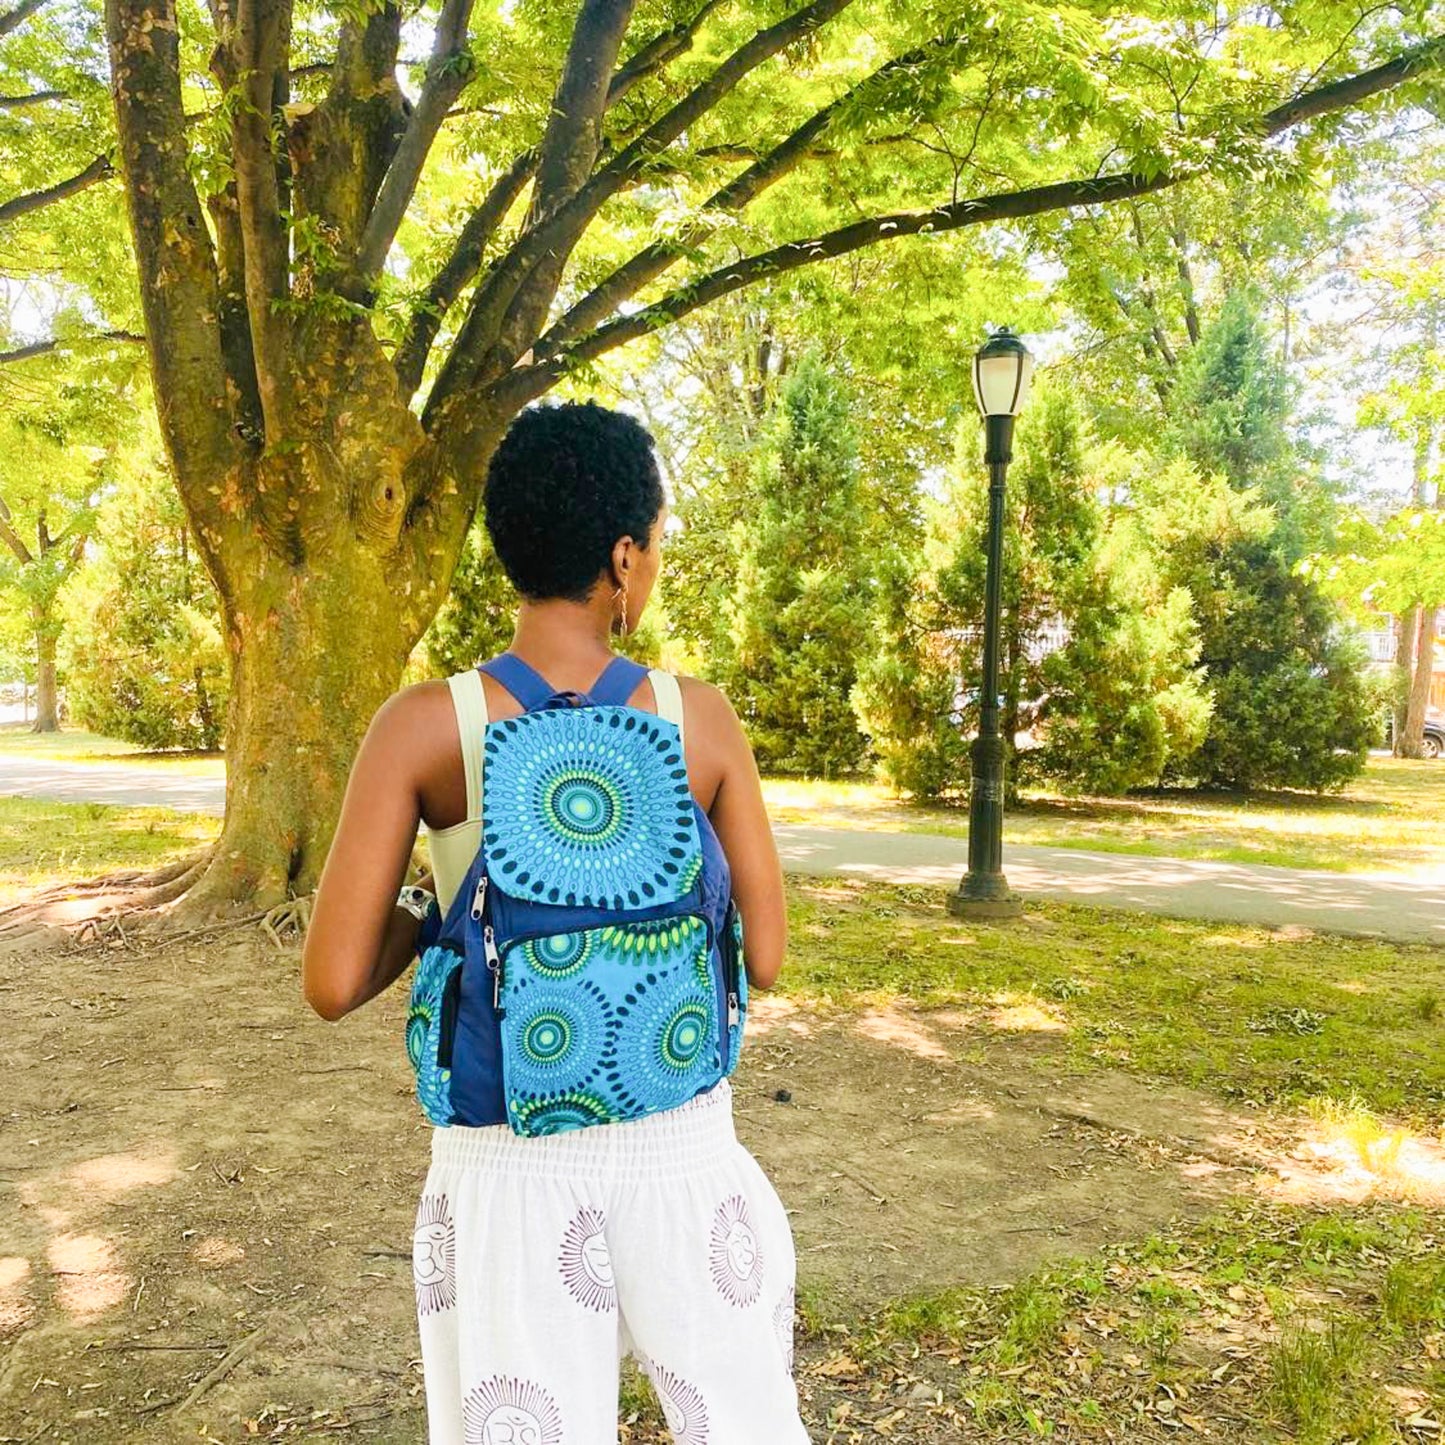 Cotton Back Pack, Handmade Unisex Back Pack, Multi Compartment Bags, Water Bottle Pockets, Travel Back Pack, Water Proof Back Pack